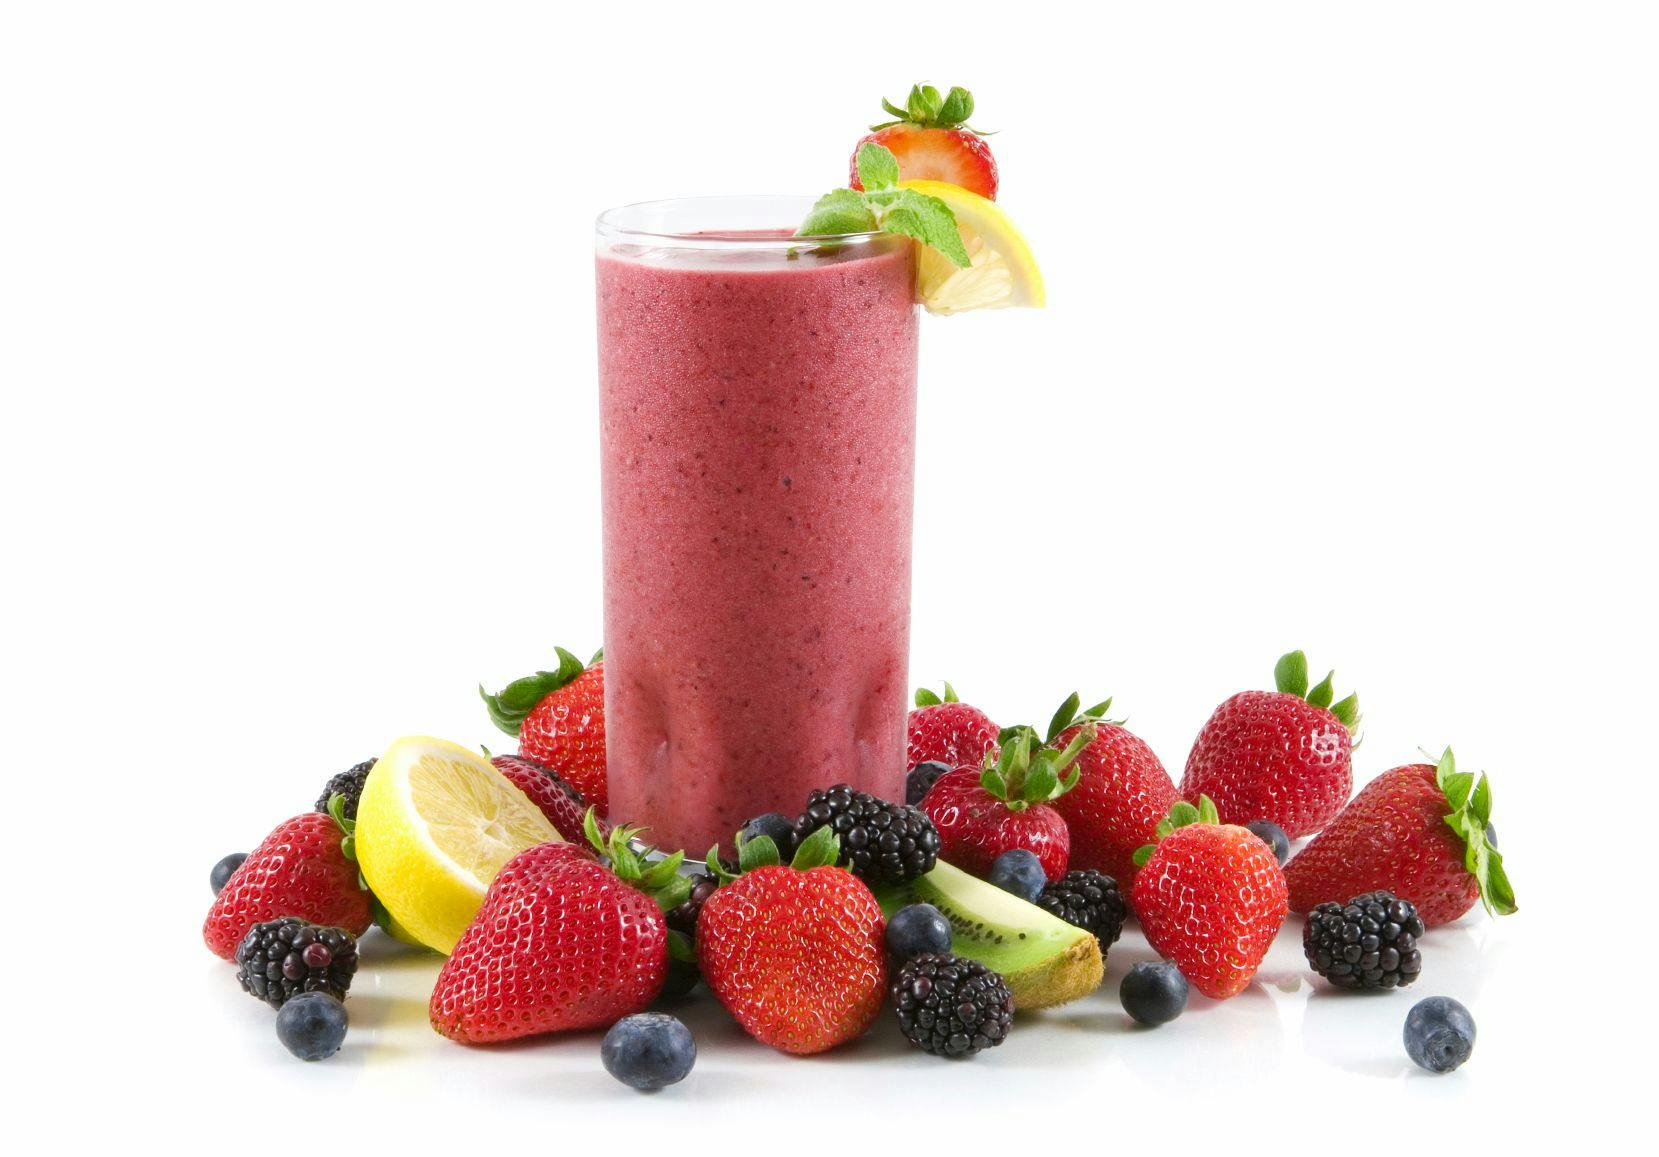 Higher-Protein Greek-Style Smoothies? New Whey Ingredient Makes It Possible